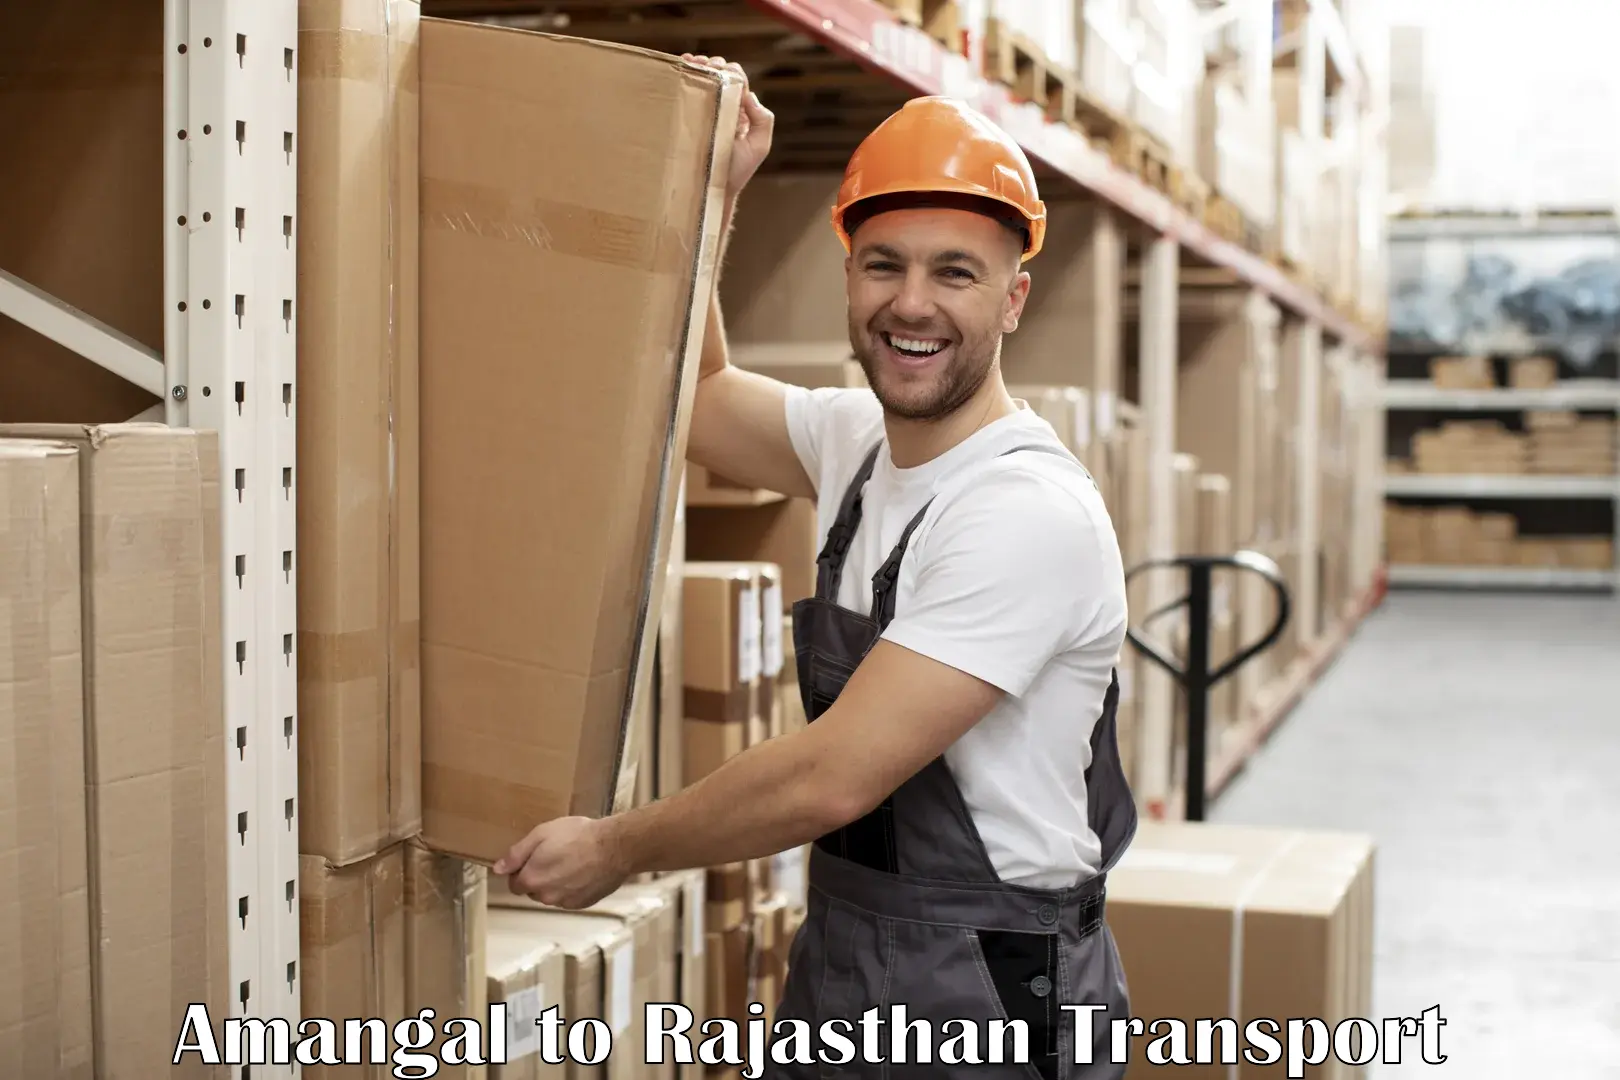 Interstate transport services Amangal to Fatehpur Sikar